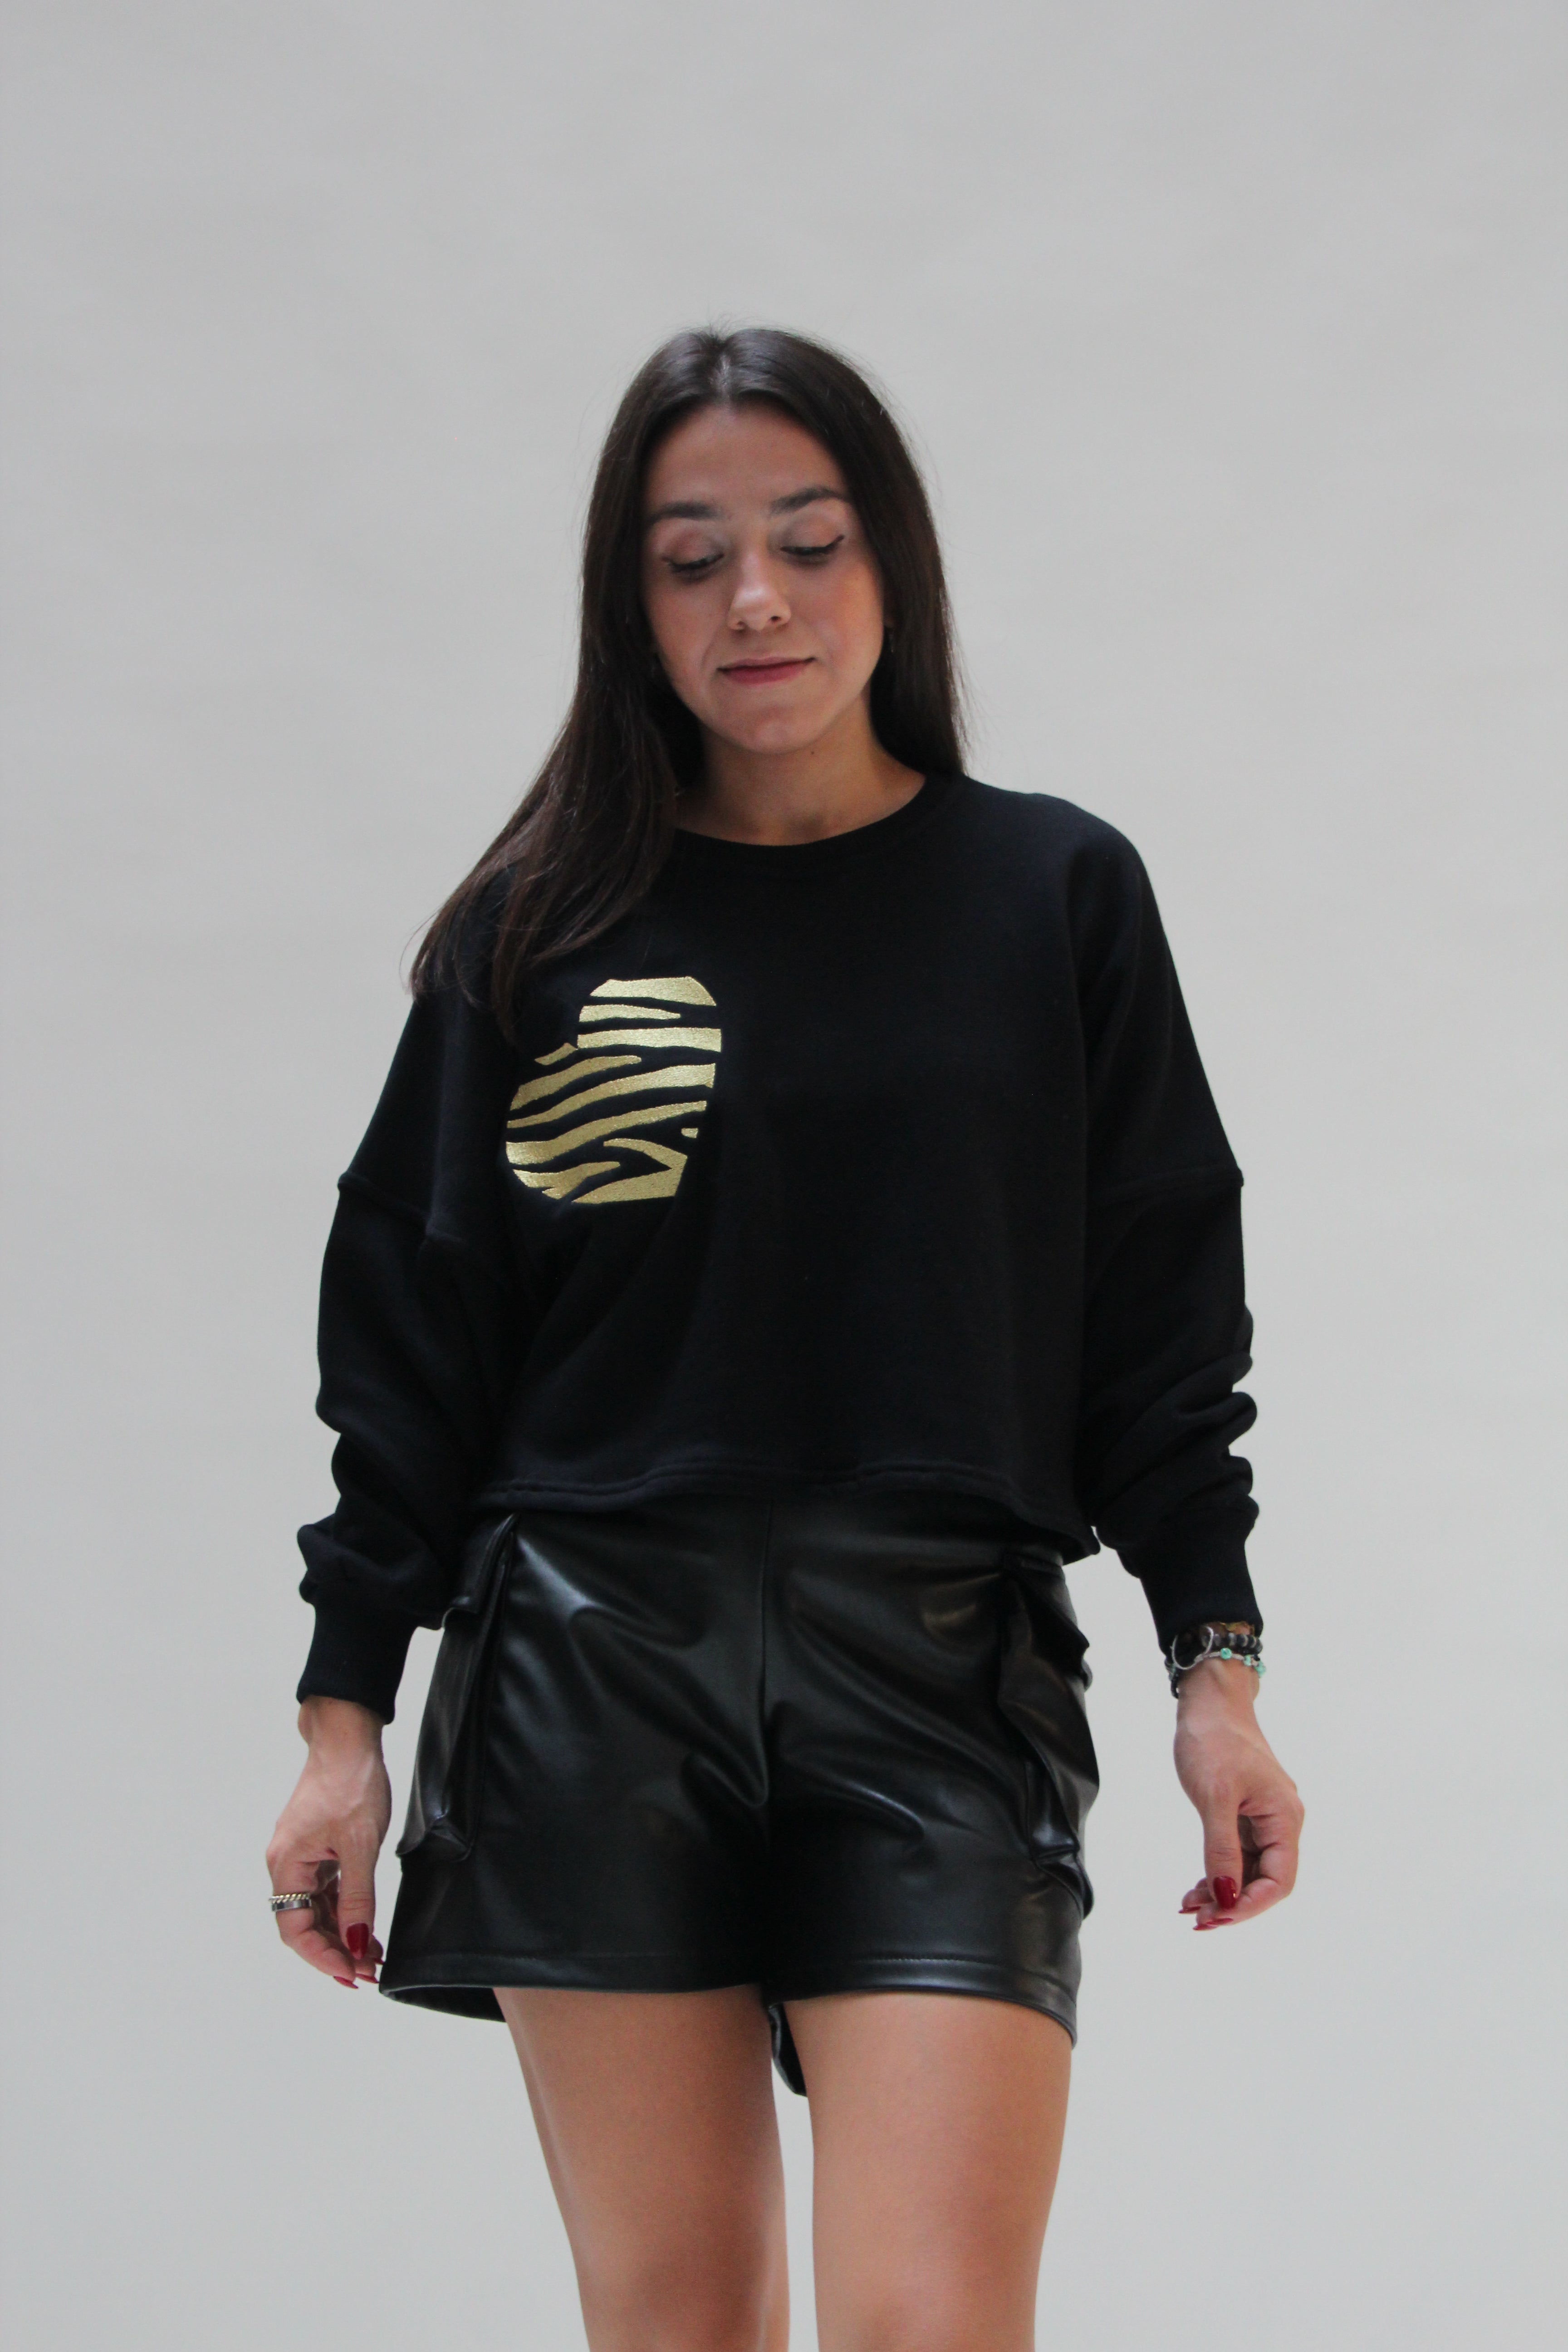 Sweatshirt with Studs on the Back For Women - Black